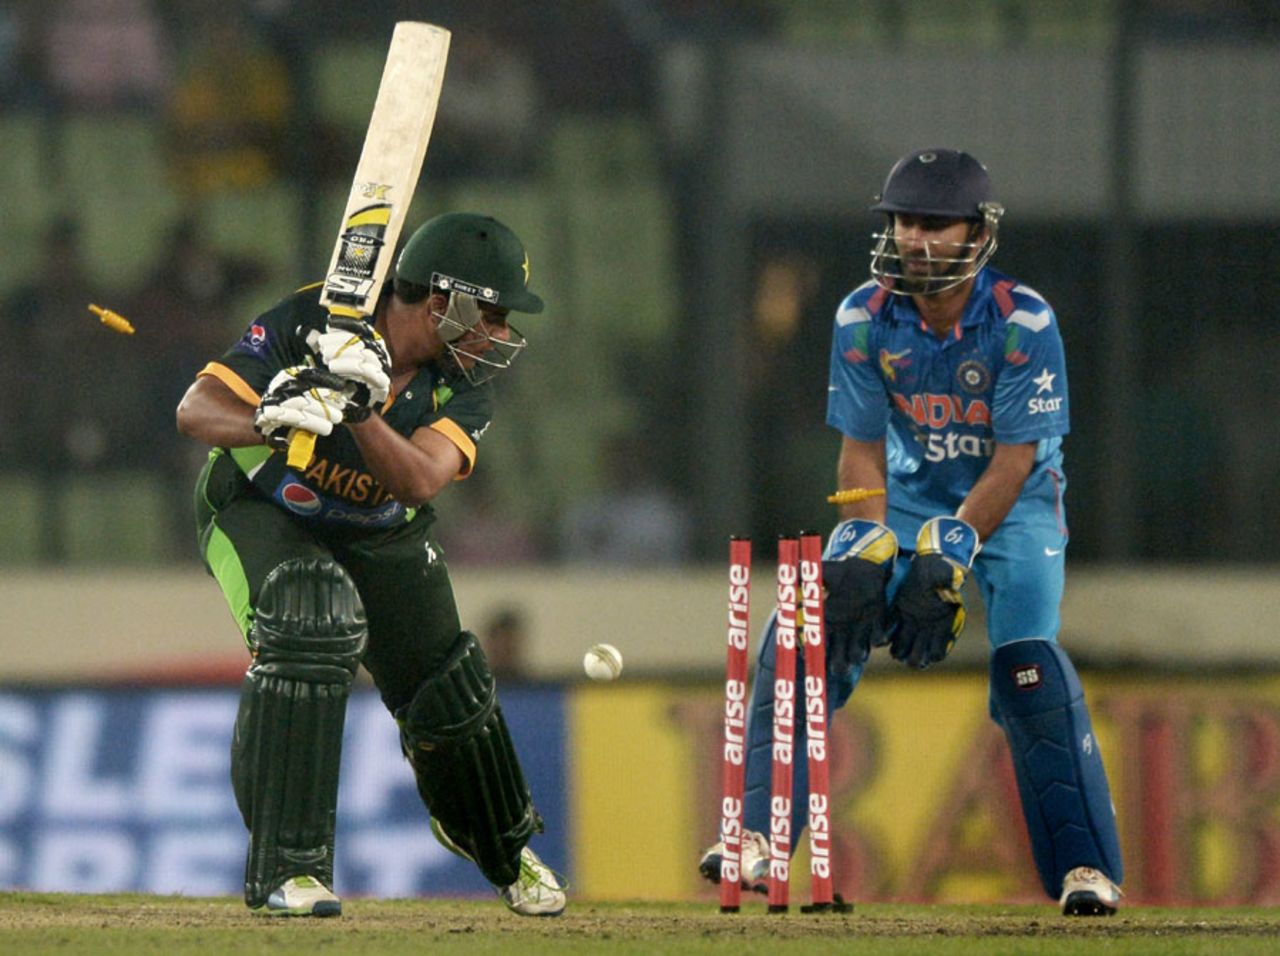 Sharjeel Khan was bowled by a carrom ball, India v Pakistan, Asia Cup, Mirpur, March 2, 2014